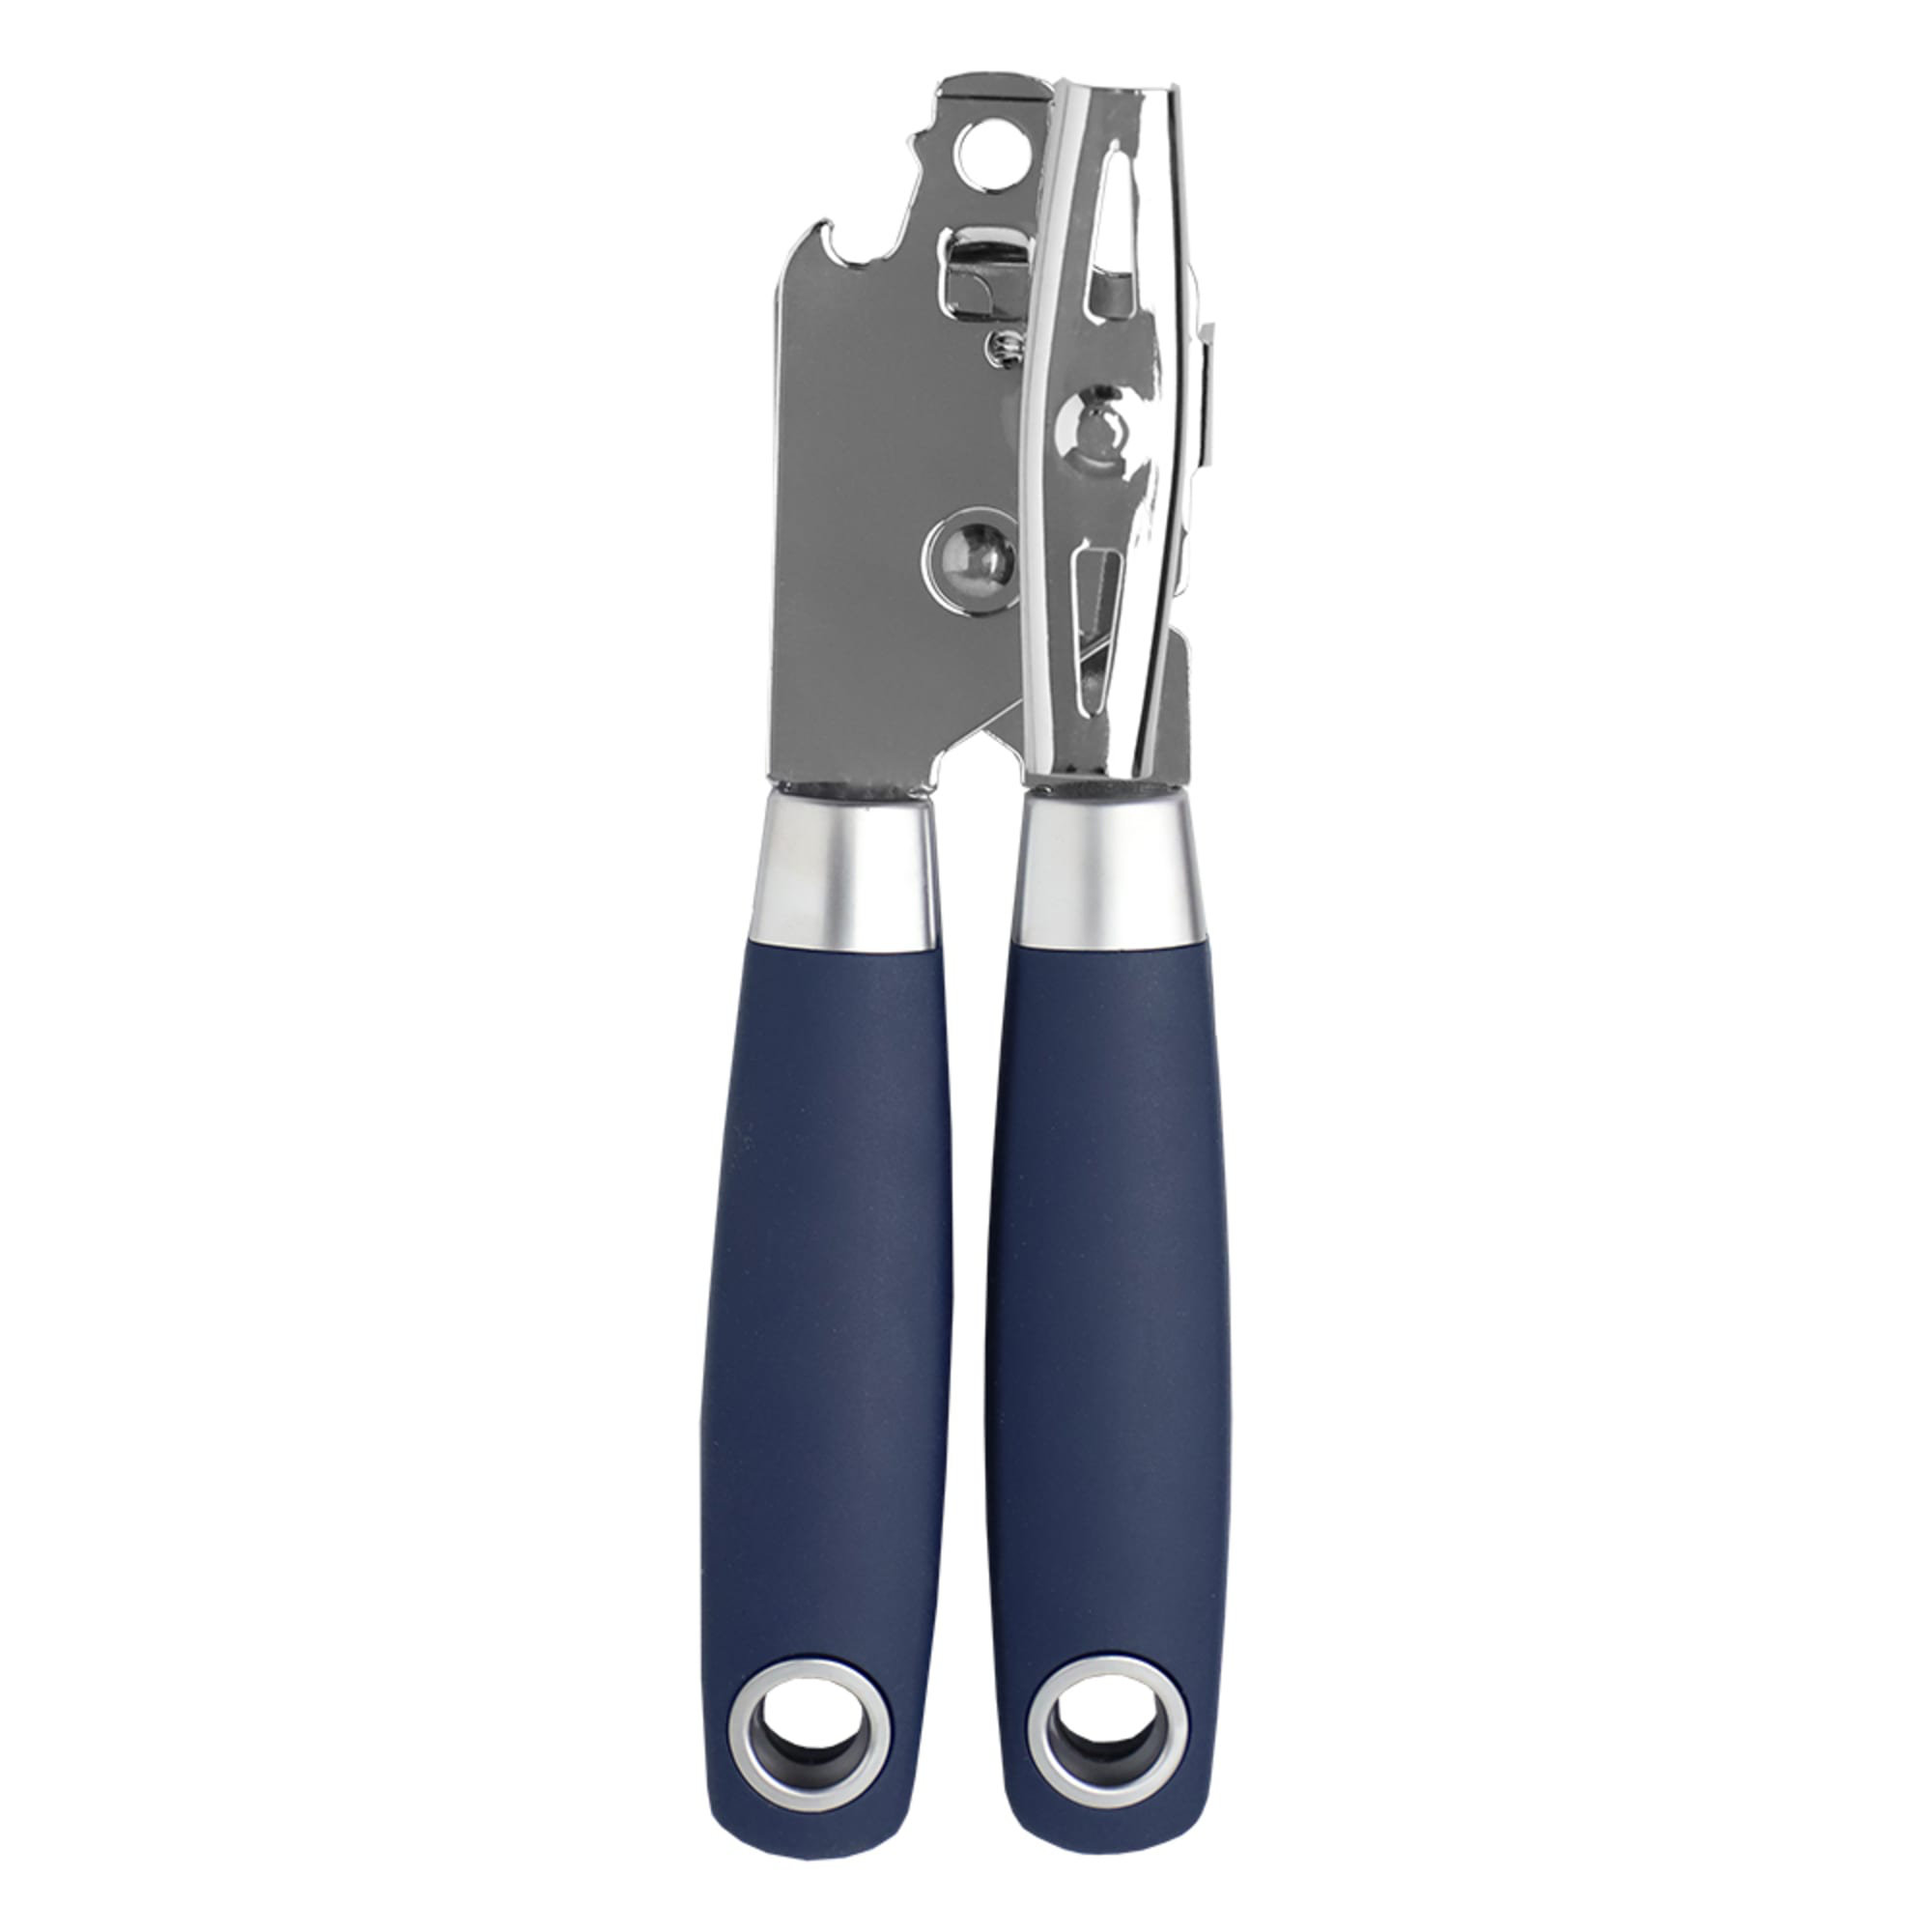 Zyliss Stainless Steel Manual Can Opener & Reviews